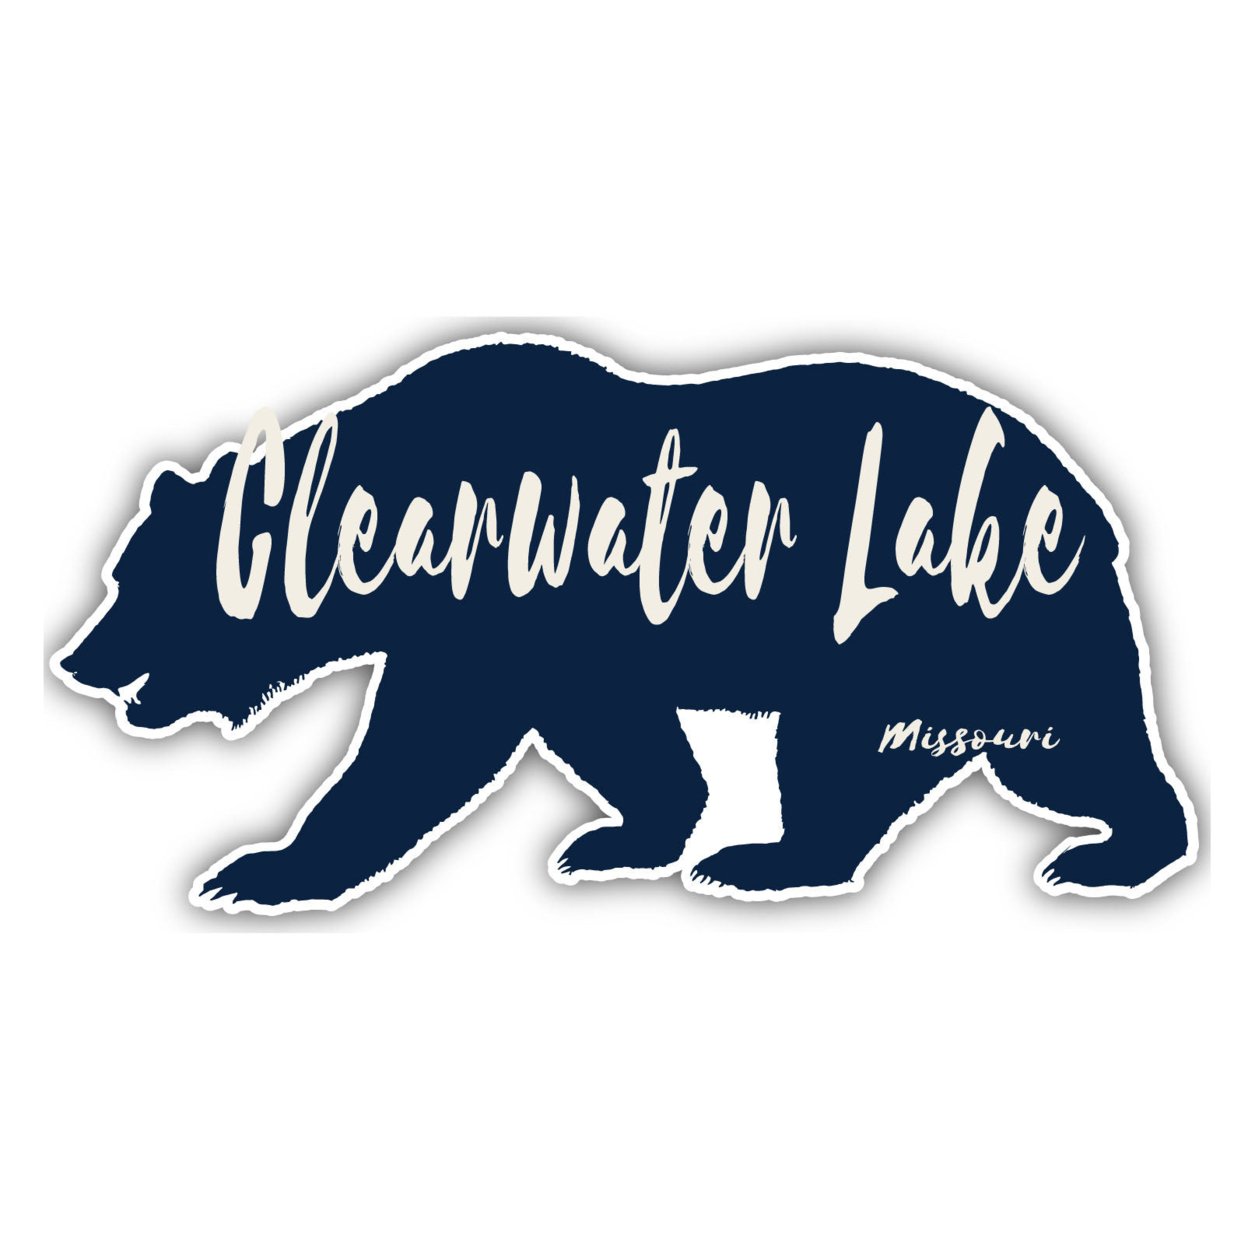 Clearwater Lake Missouri Souvenir Decorative Stickers (Choose Theme And Size) - 4-Pack, 10-Inch, Bear